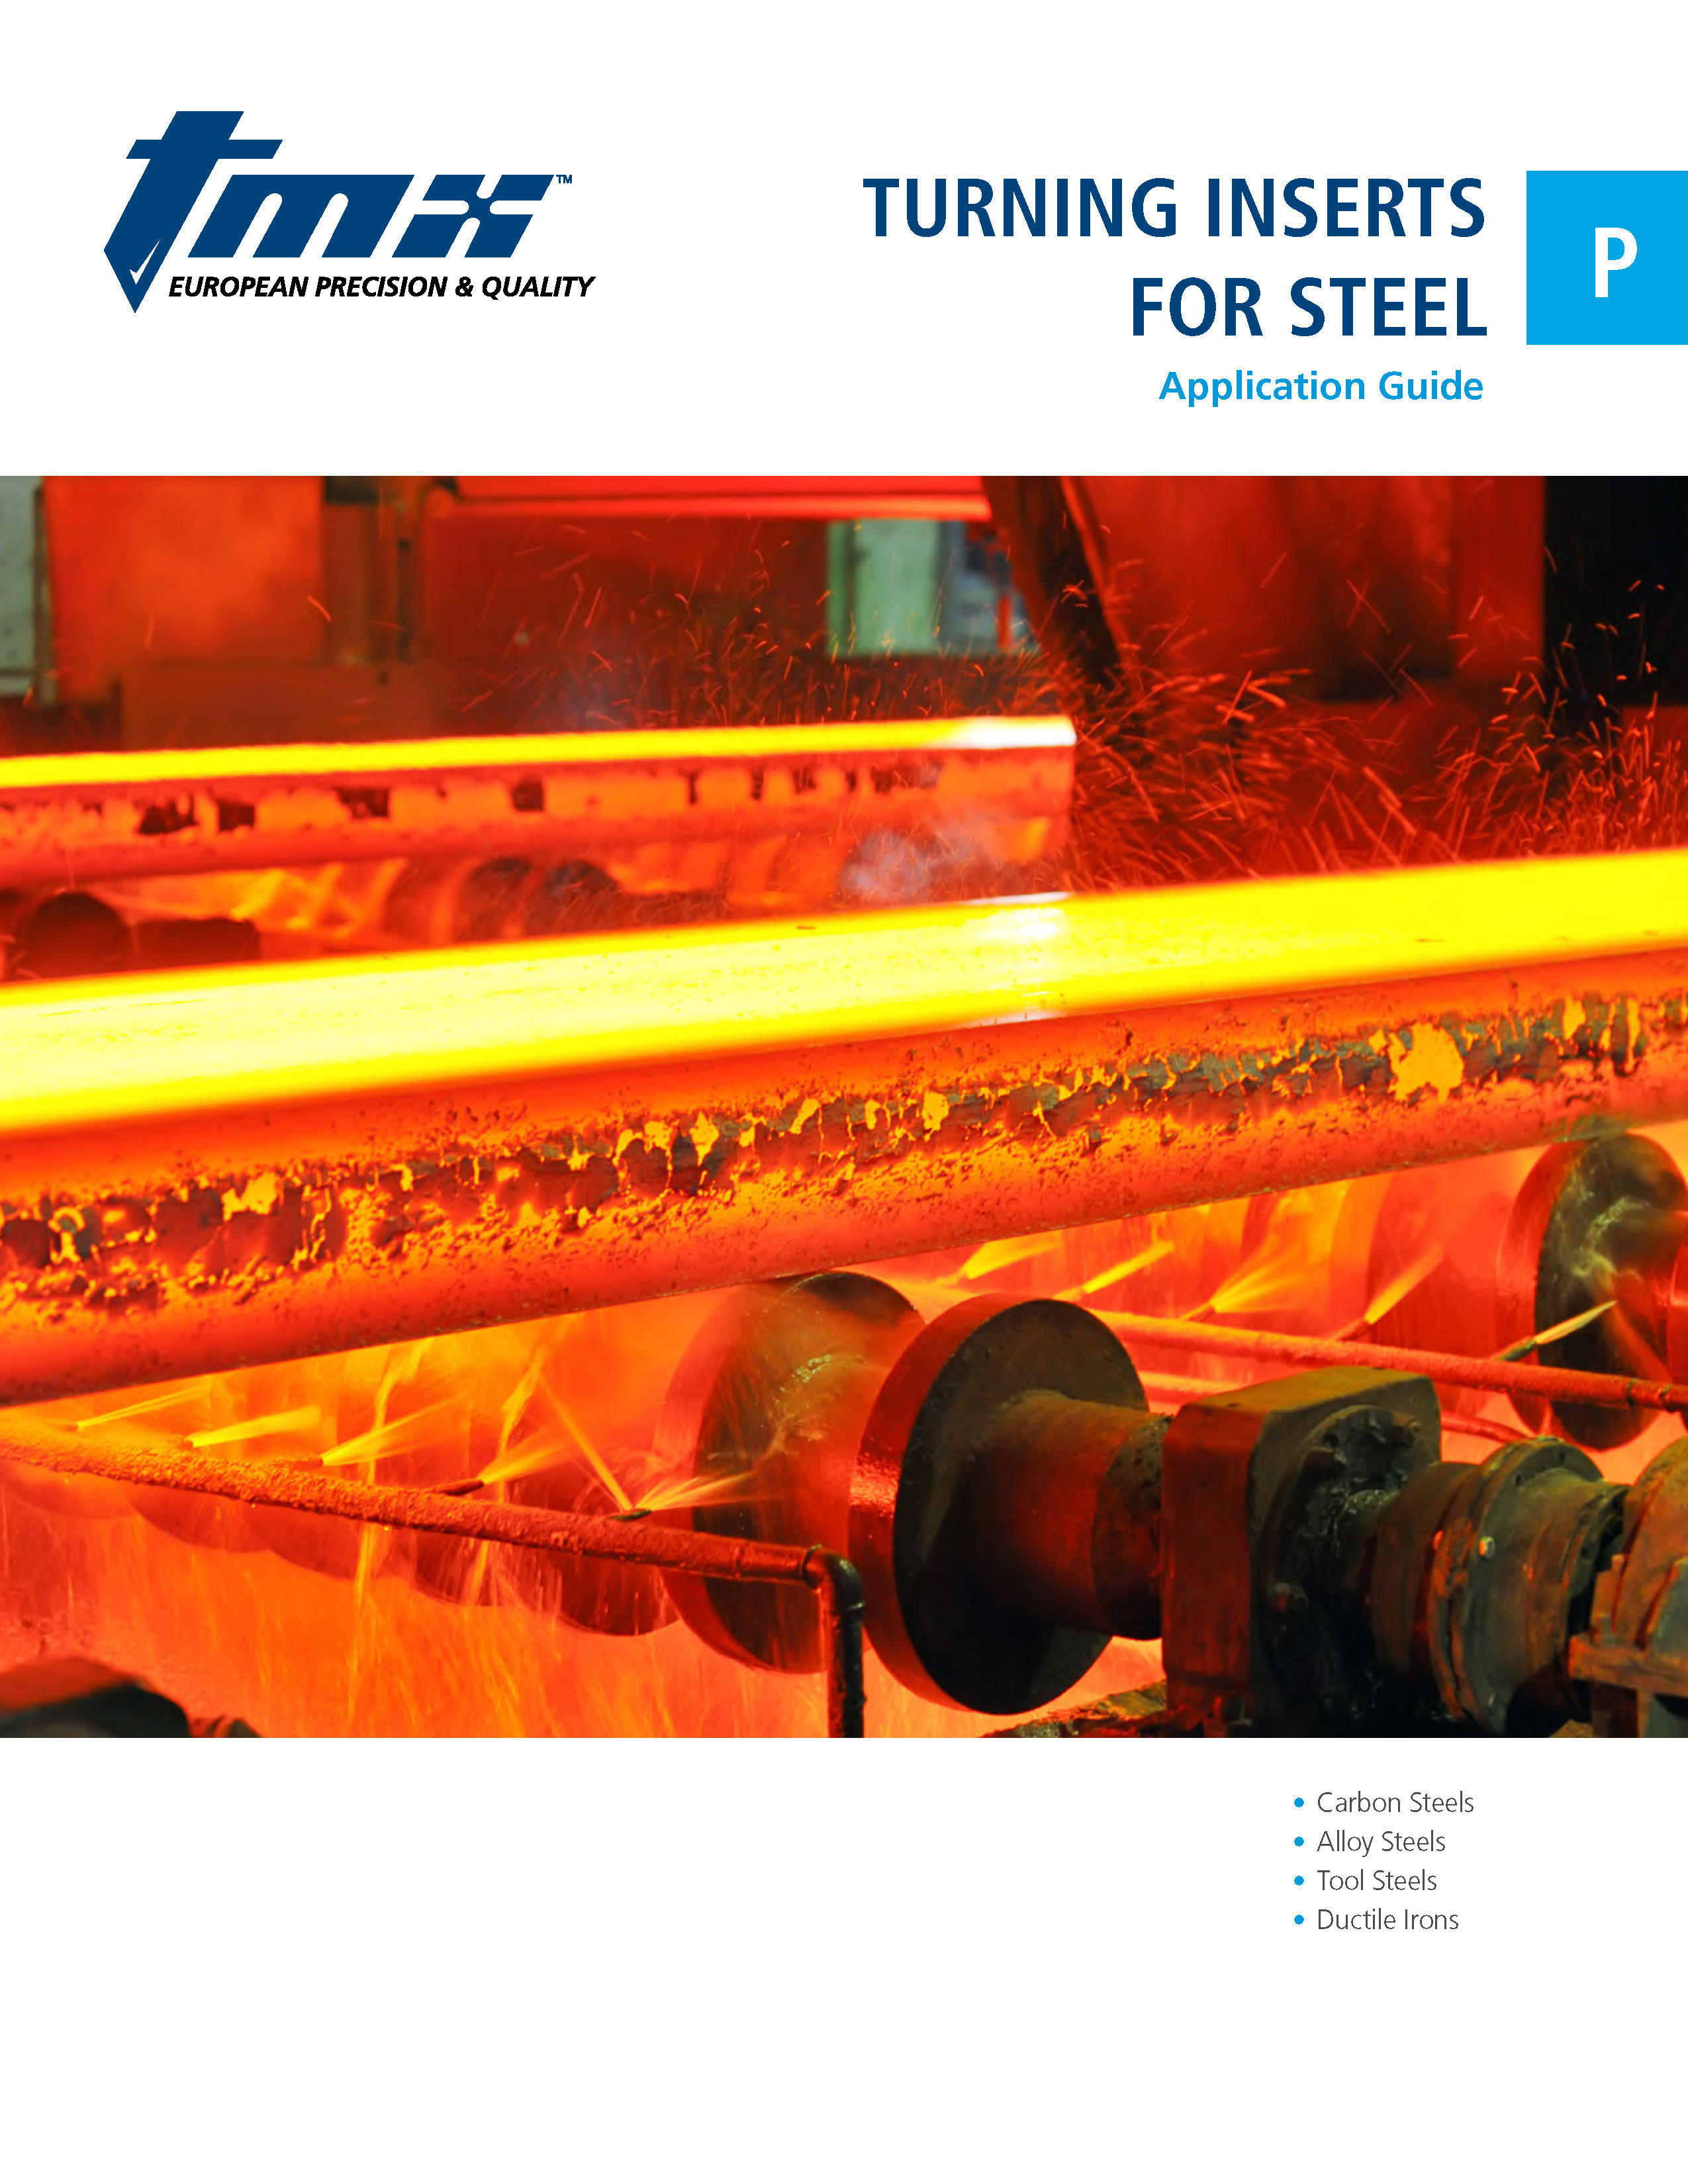 TMX Turning Inserts for Steel